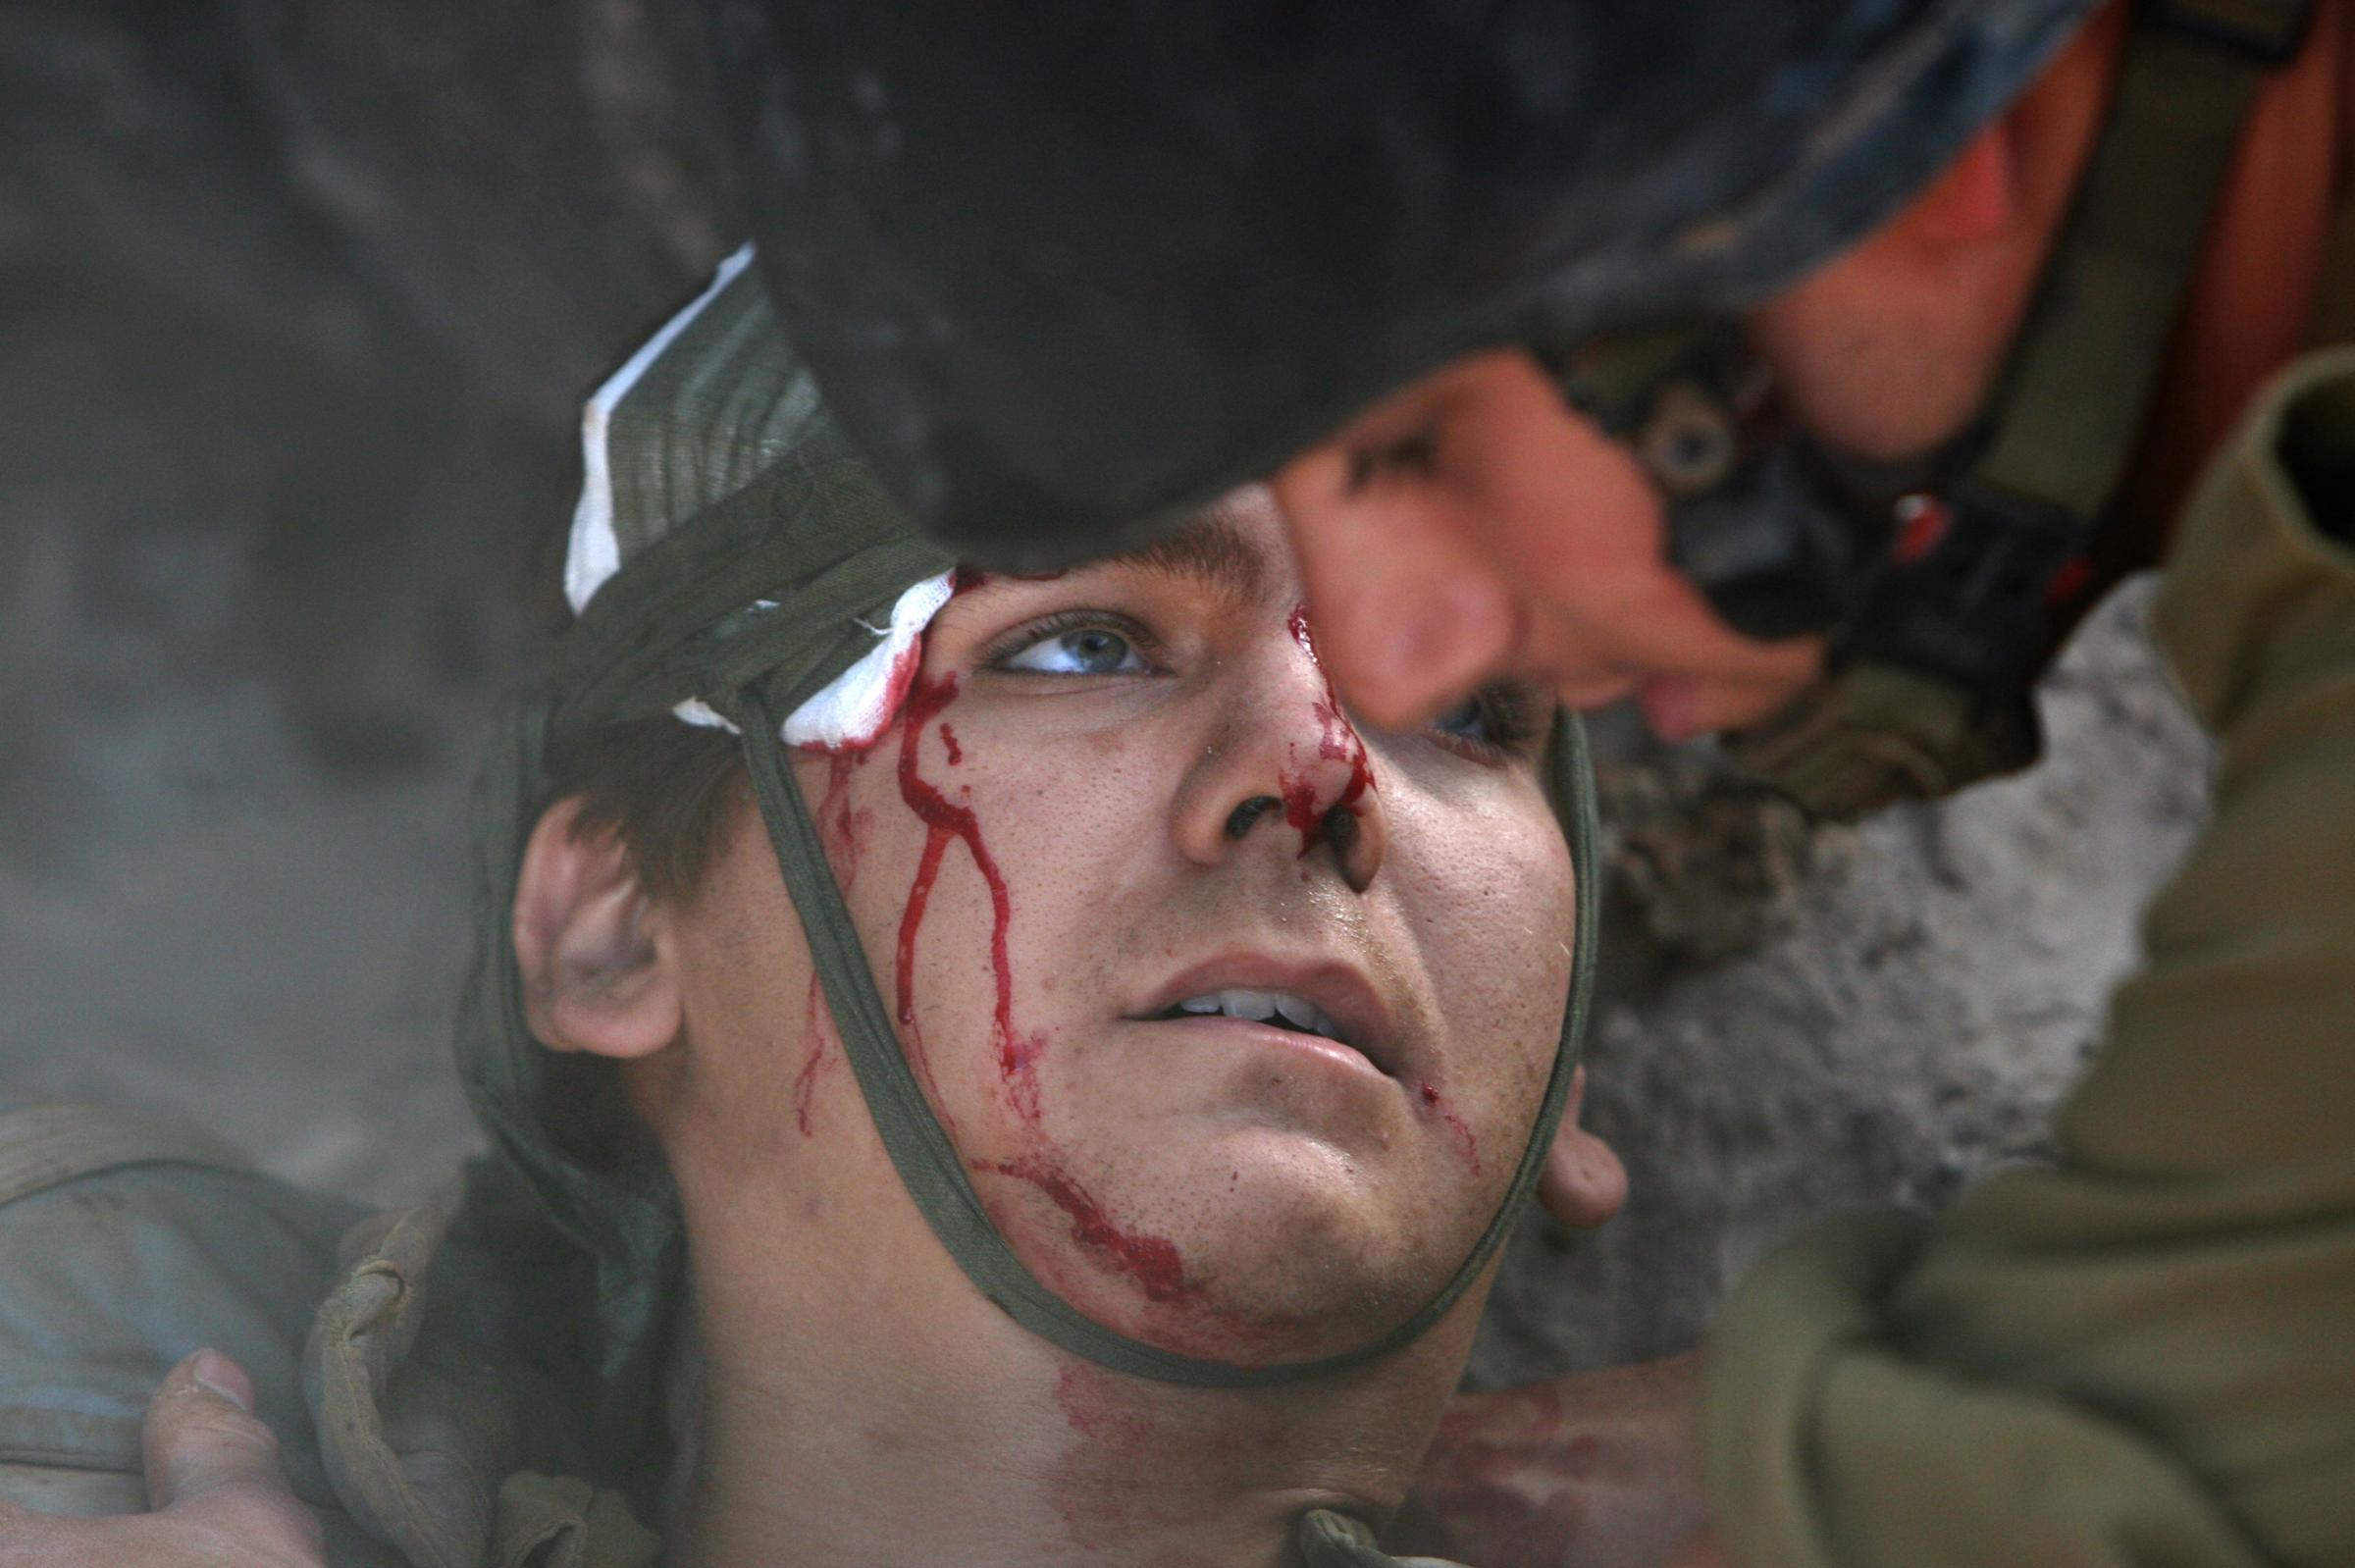 This image I took, as the only embedded photographer with the IDF, depicts a classic "sacrifice" visual narrative of a hero giving his life for his nation. I was told by several people that it was ’very Vietnam’. Since this image was not overtly gruesome and since the soldier survived his injuries, it could be prominently displayed. I later learned that this scene actually represents a victim of a friendly fire incident, though it had already circulated and had been published with the caption that this soldier had been wounded in a Hezbollah attack. Because I insisted that information be included in the caption, the image lost value as a propaganda tool. This soldier was inconveniently hit by the wrong explosives. I have come to believe that embedded ‘war photography’ simplifies the brutal ambiguity of conflict into well-worn and widely recognized visual templates. We, “war photographers,” help in reinforcing masculine myths of war as a purging experience. As it stands, I believe my images did a great disservice to the people who died or participated in this unnecessary and farcical demonstration of force in 2006, which besides claiming the lives of more than one hundred Israeli soldiers, also killed almost 30 times more Lebanese civilians than the 44 Israeli civilian dead. This conditioned Israeli public opinion to accept similar carnage in Gaza in 2009 and 2014 as a reasonable response.